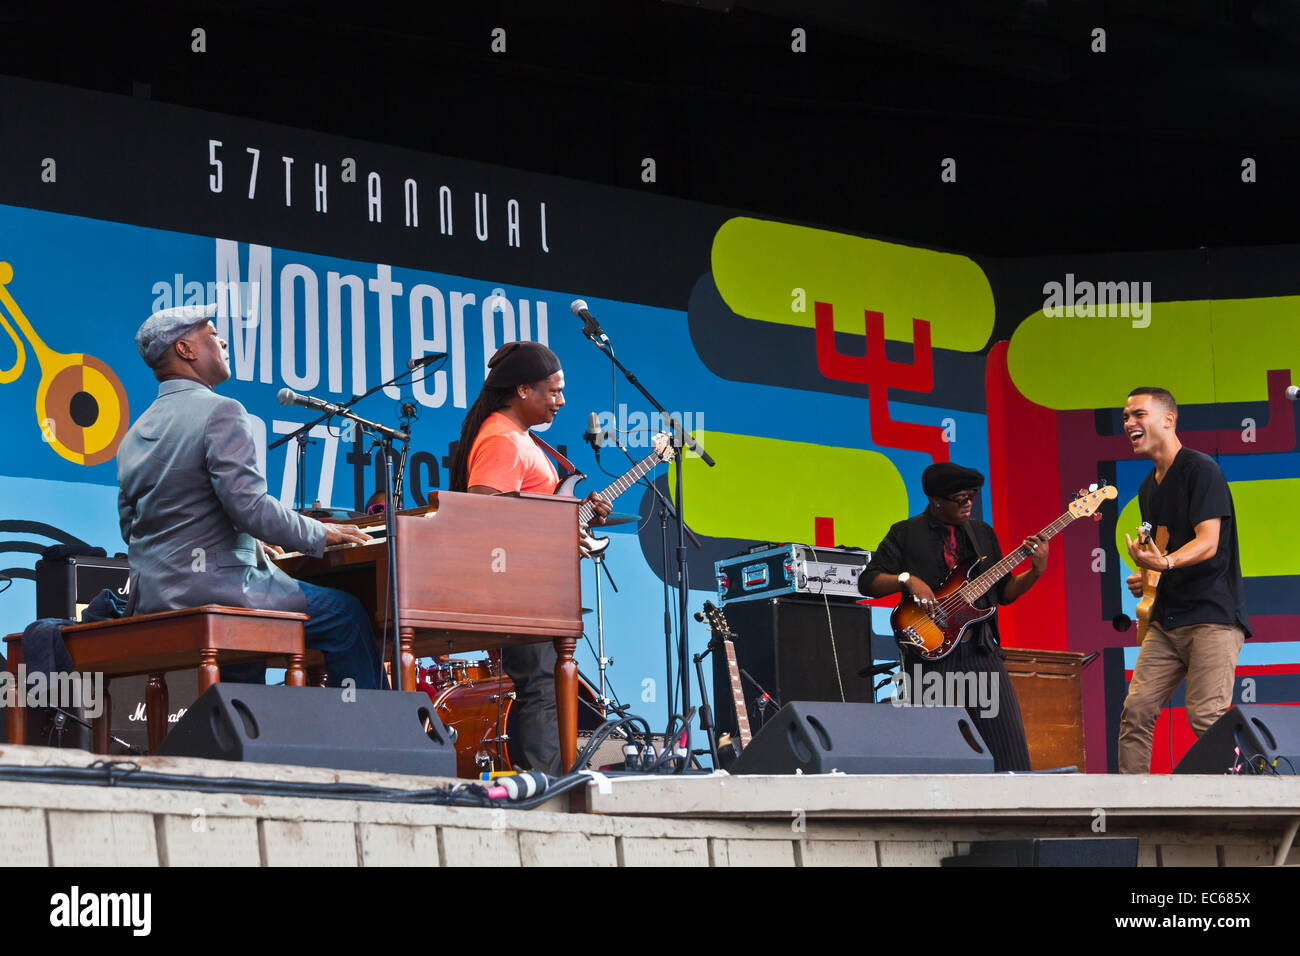 BOOKER T JONES preforms on the main stage at the MONTEREY JAZZ FESTIVAL Stock Photo